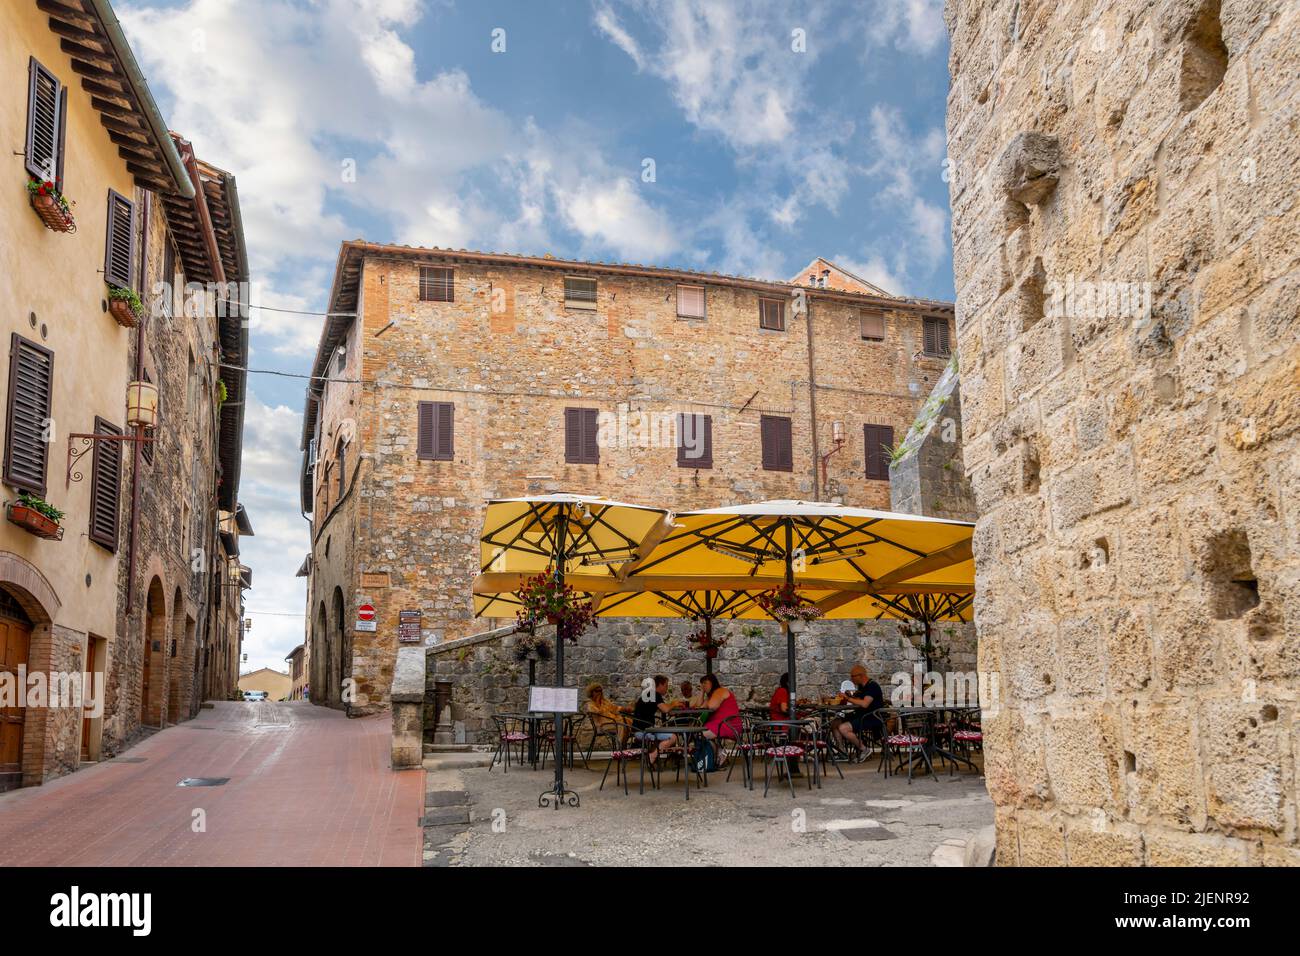 A small outdoor sidewalk cafe inside the walls of the medieval hill town of San Gimignano, Italy, in the Tuscany region. Stock Photo